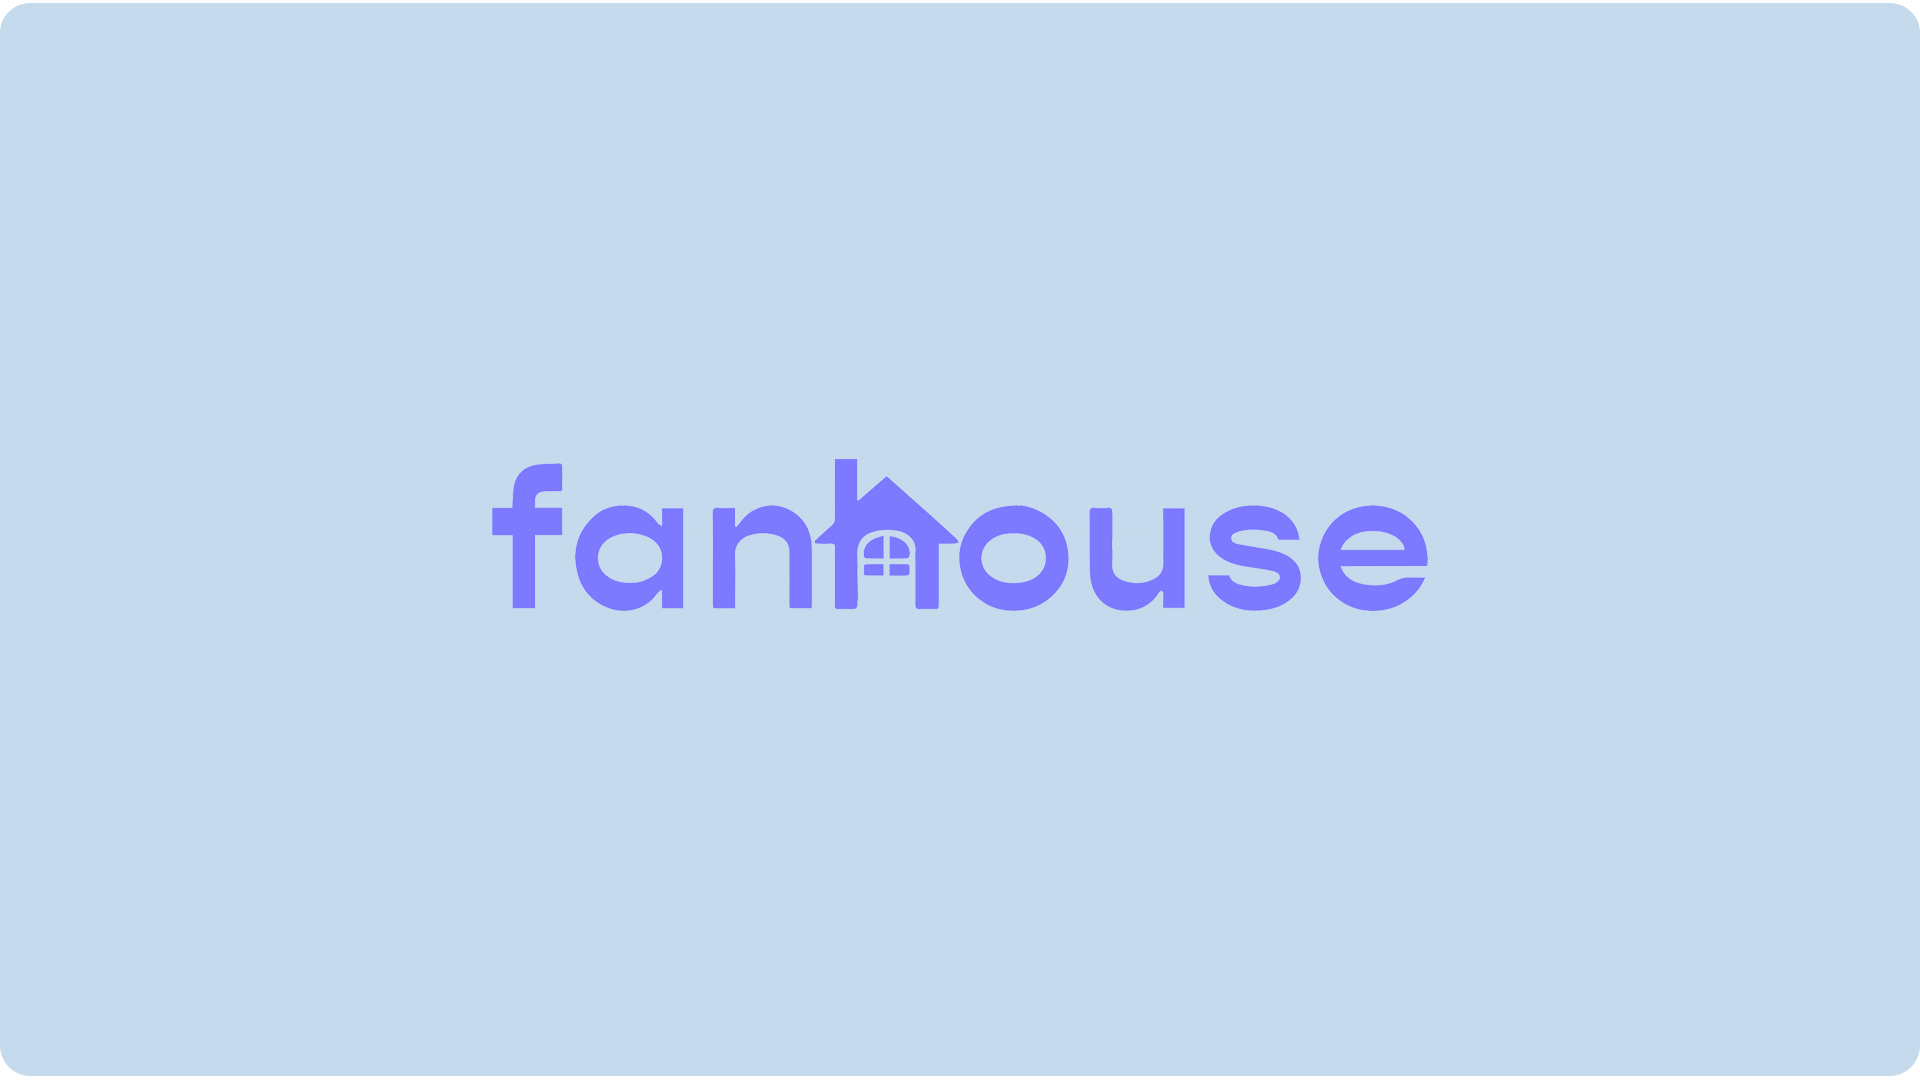 sites like onlyfans include fanhouse